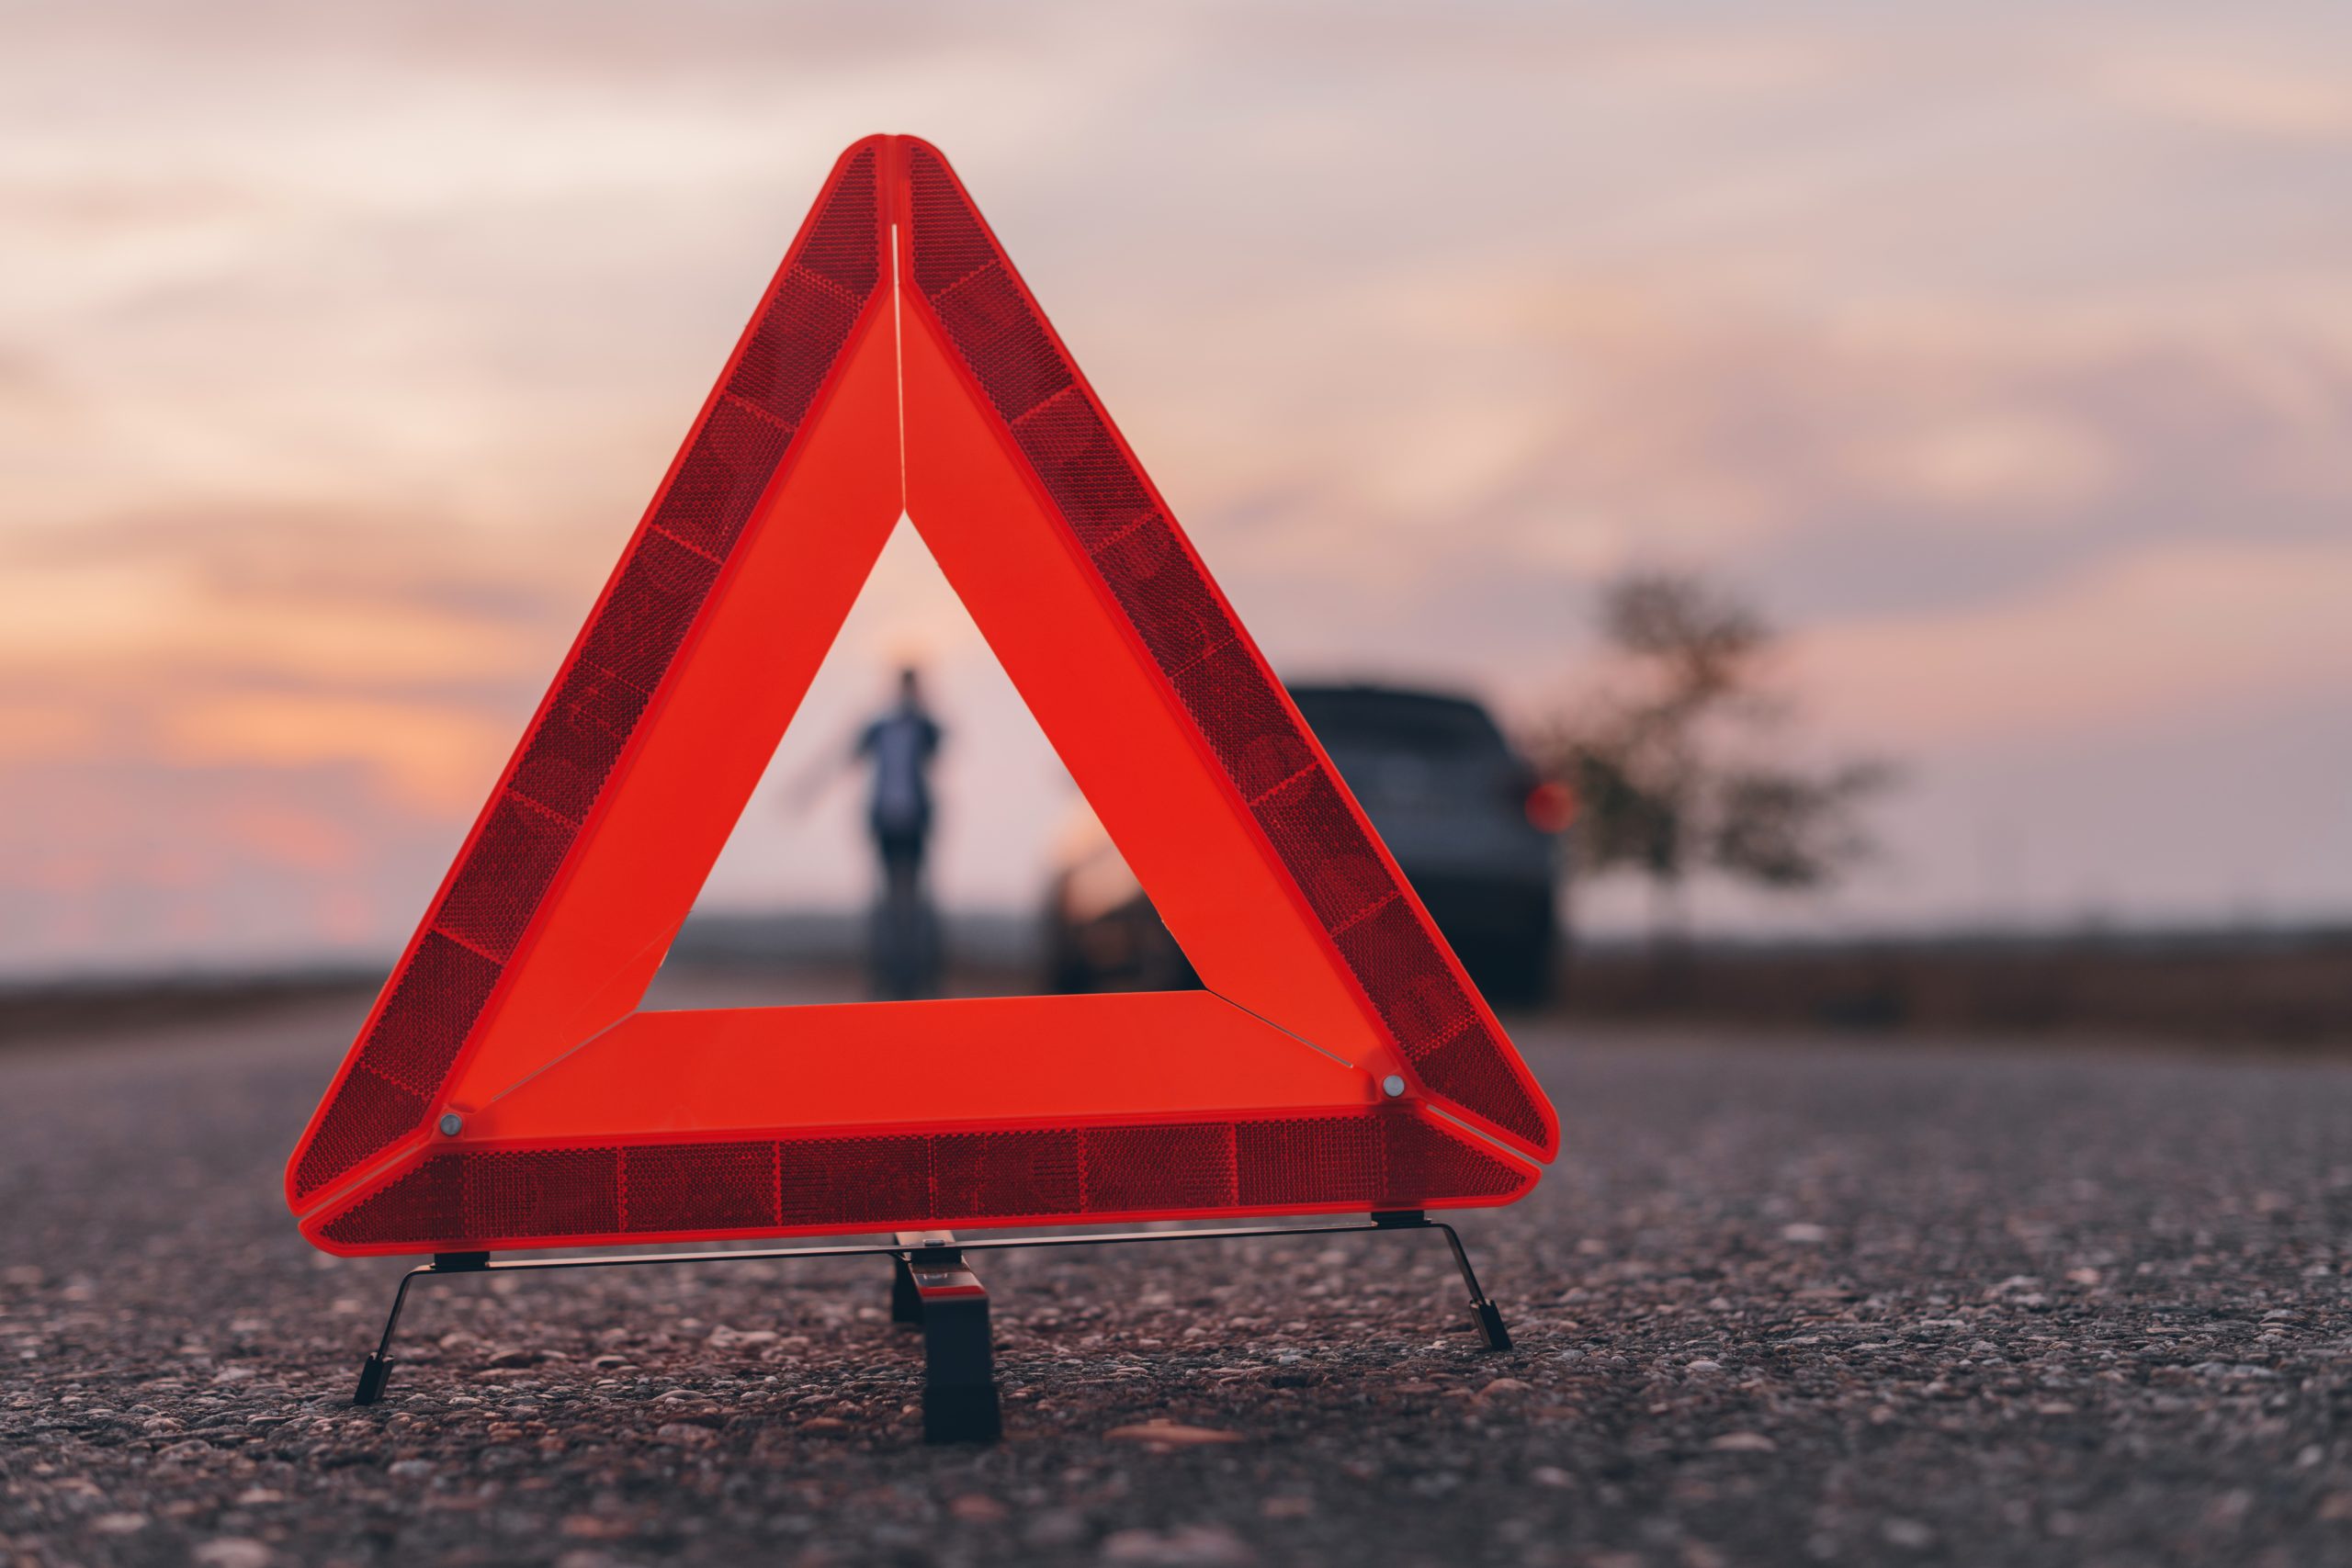 Neglecting the use of the warning triangle, a High-risk behavior